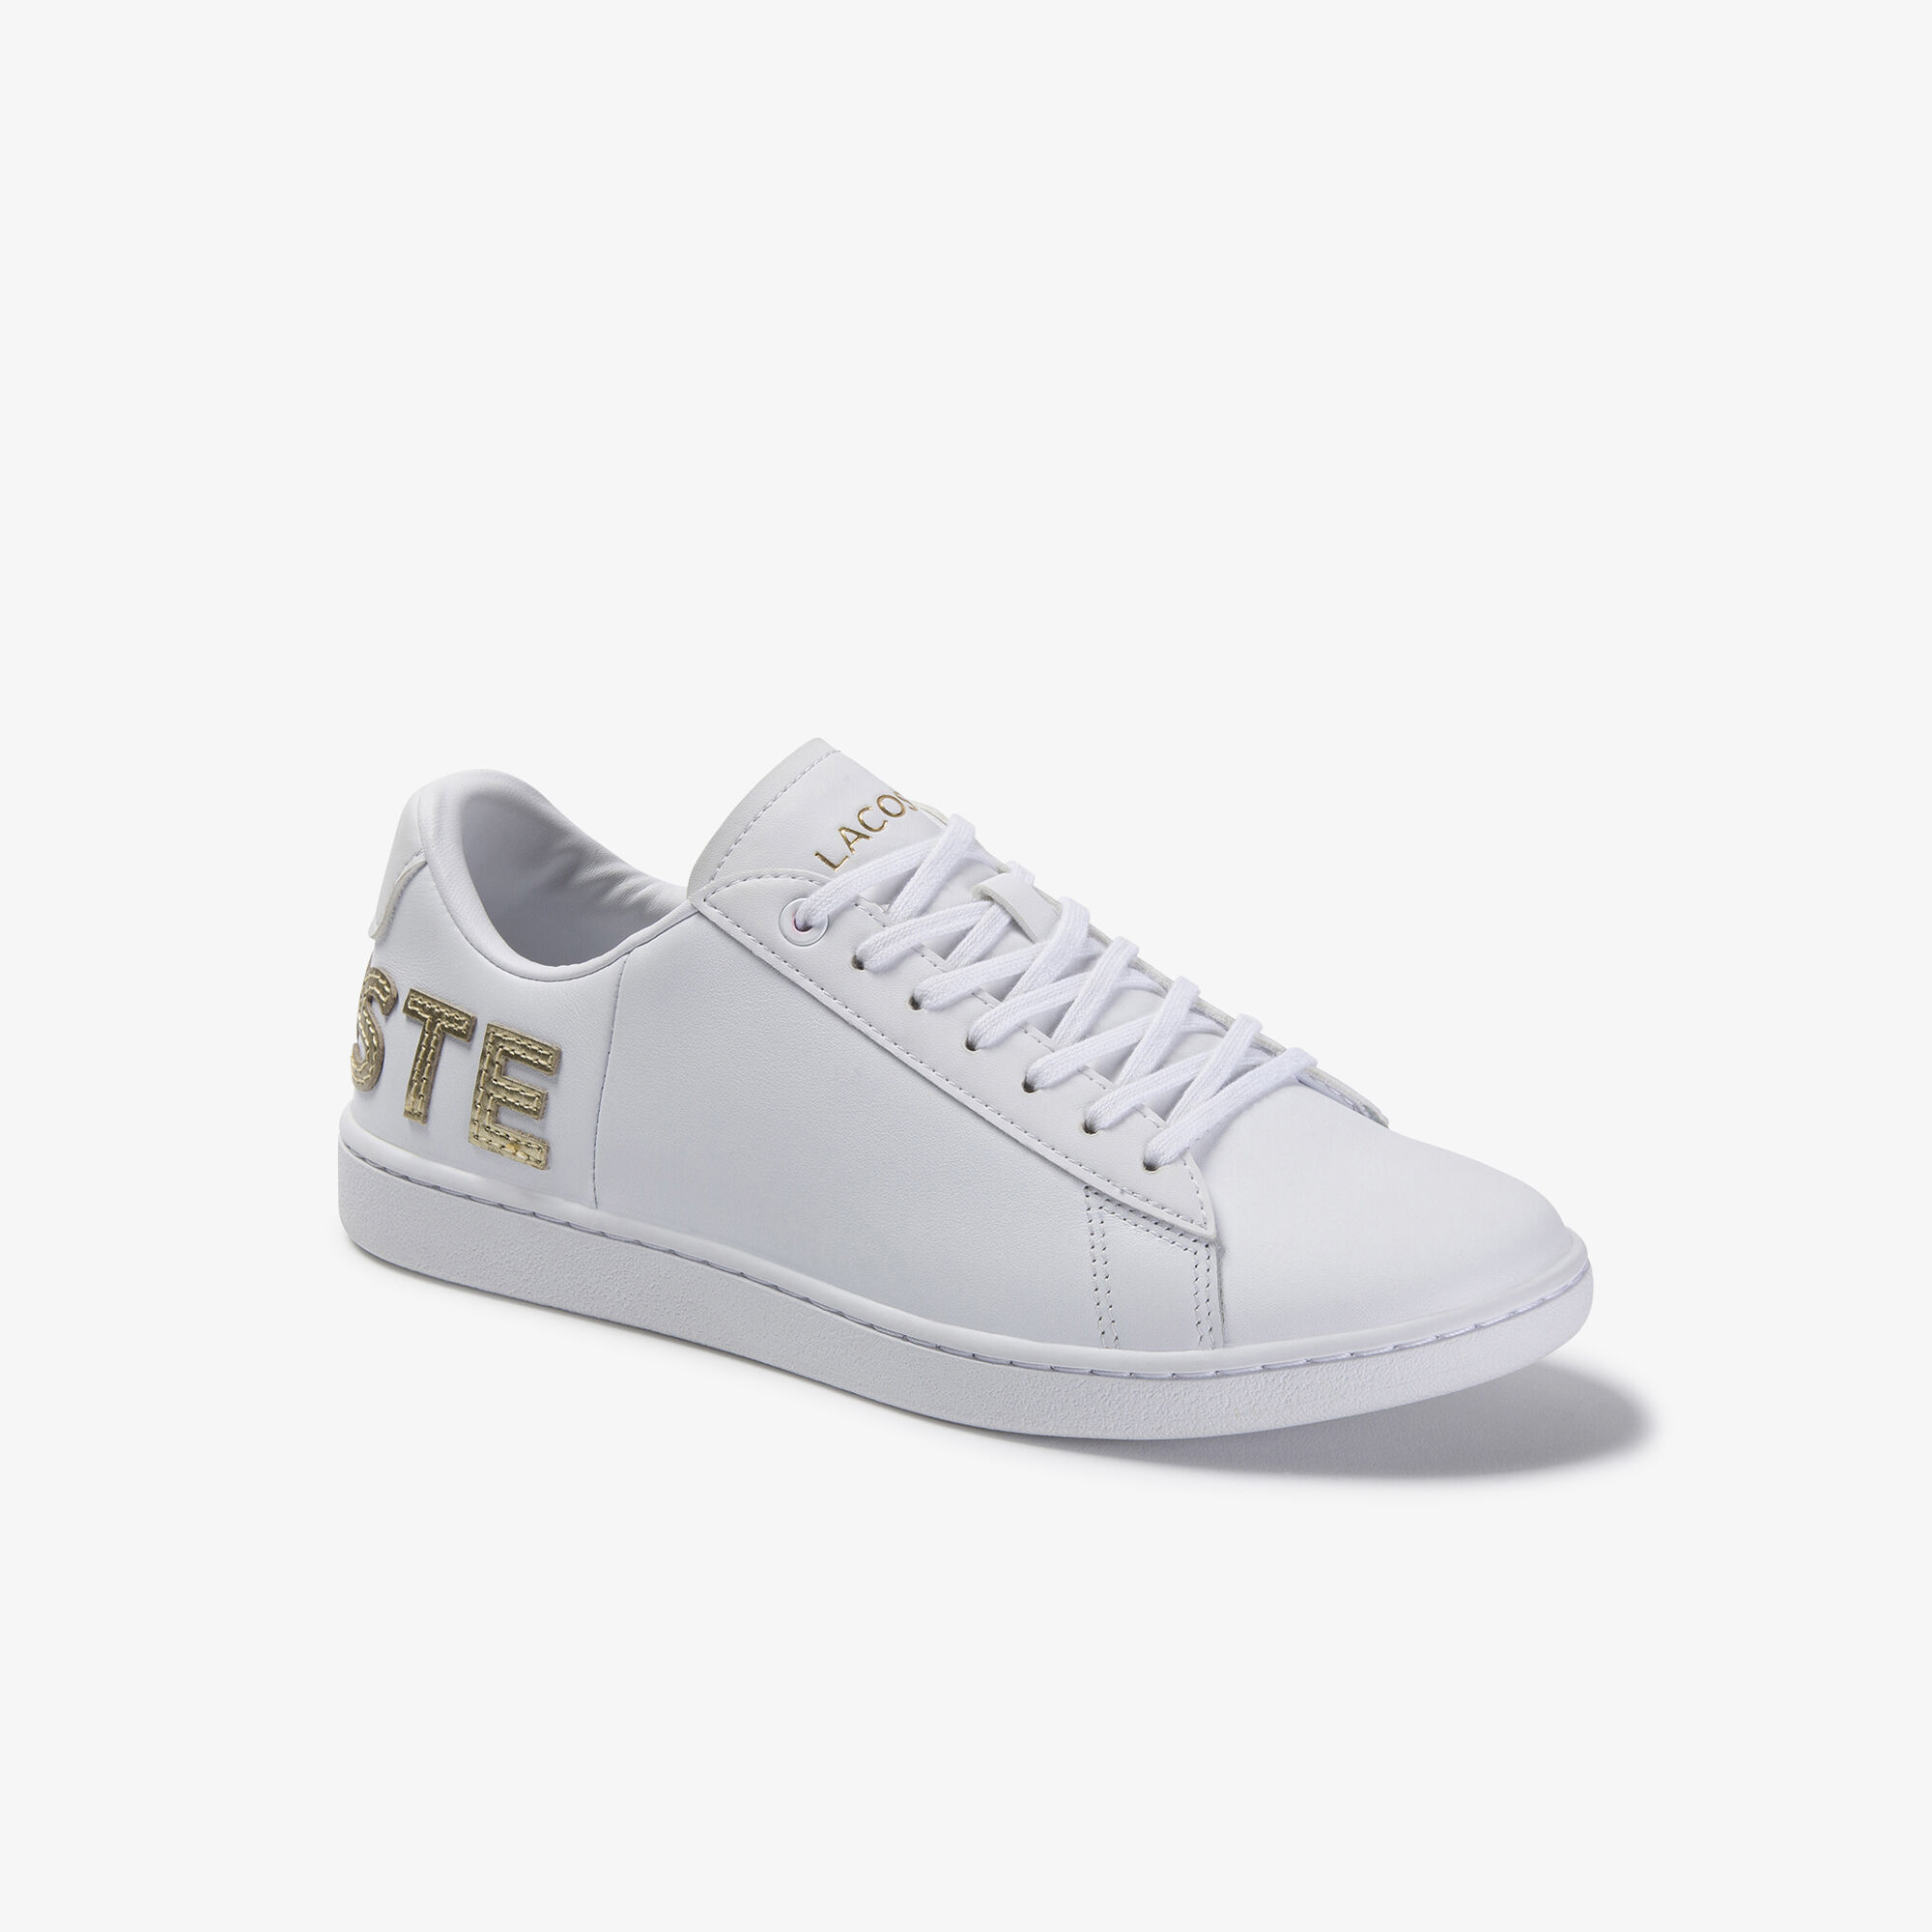 Women's Carnaby Evo Tonal Leather and Synthetic Trainers